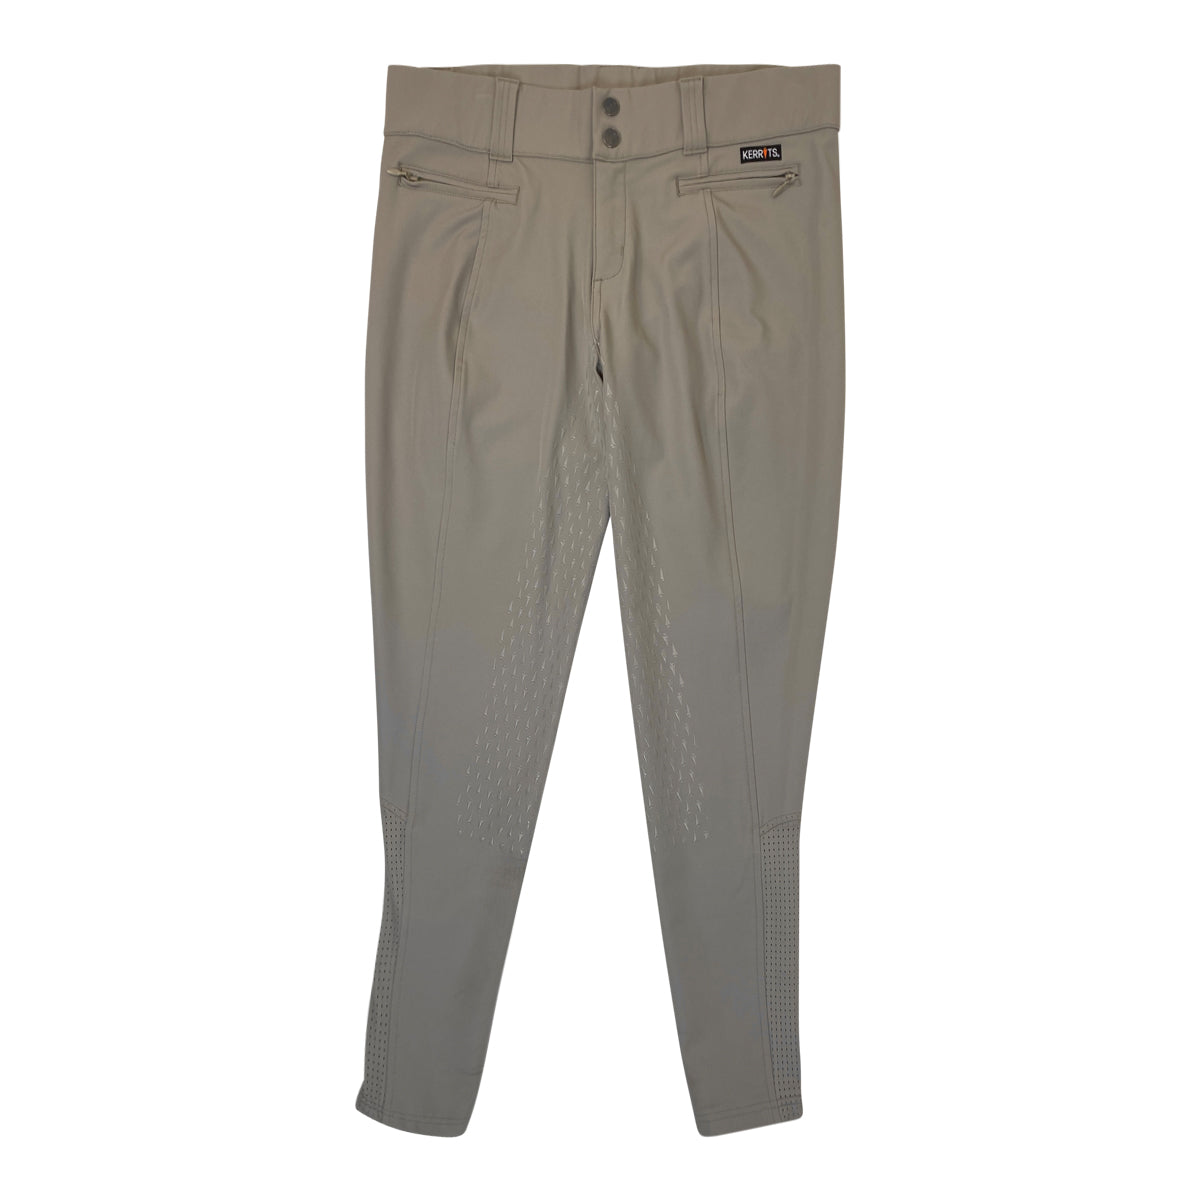 Kerrits 'Affinity Ice Fil' Breeches in Sand